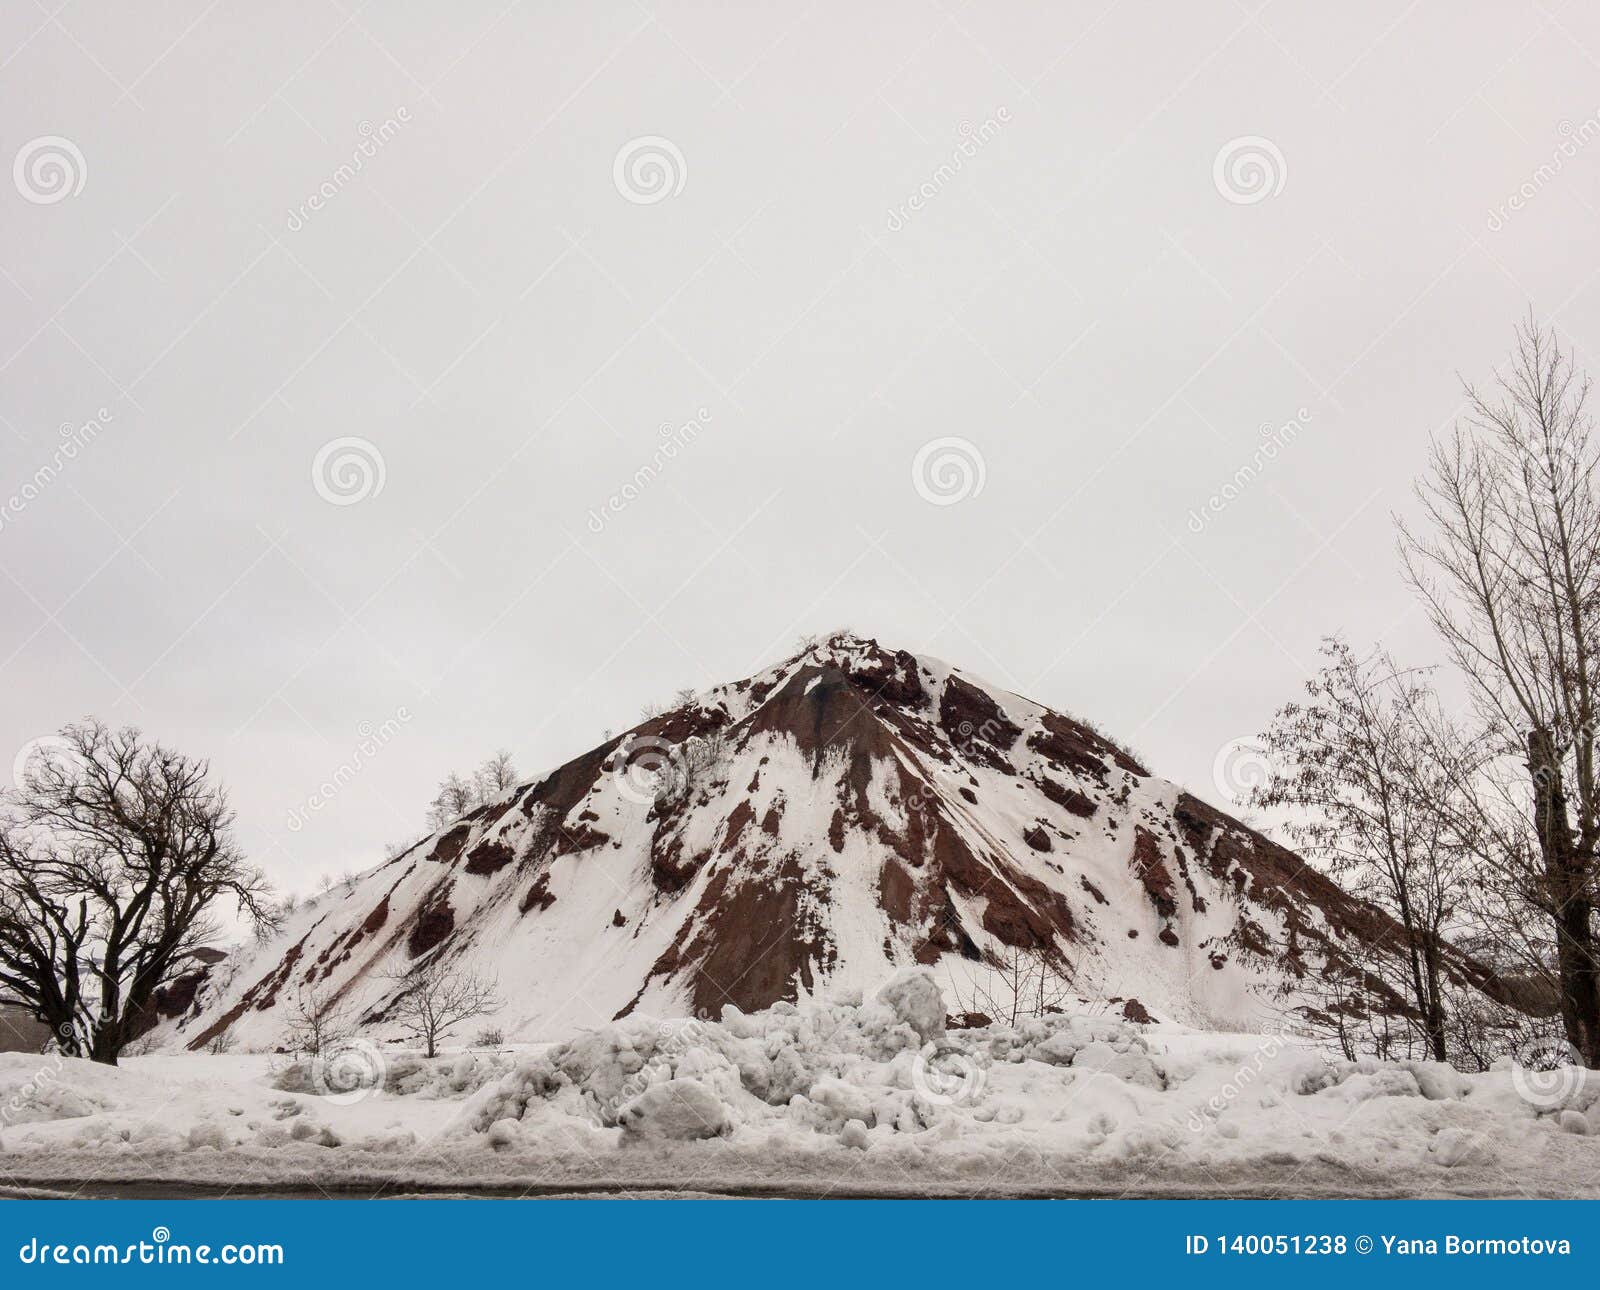 Winter Mountain Landscape. Tranquility Of Nature Stock Photo - Image of